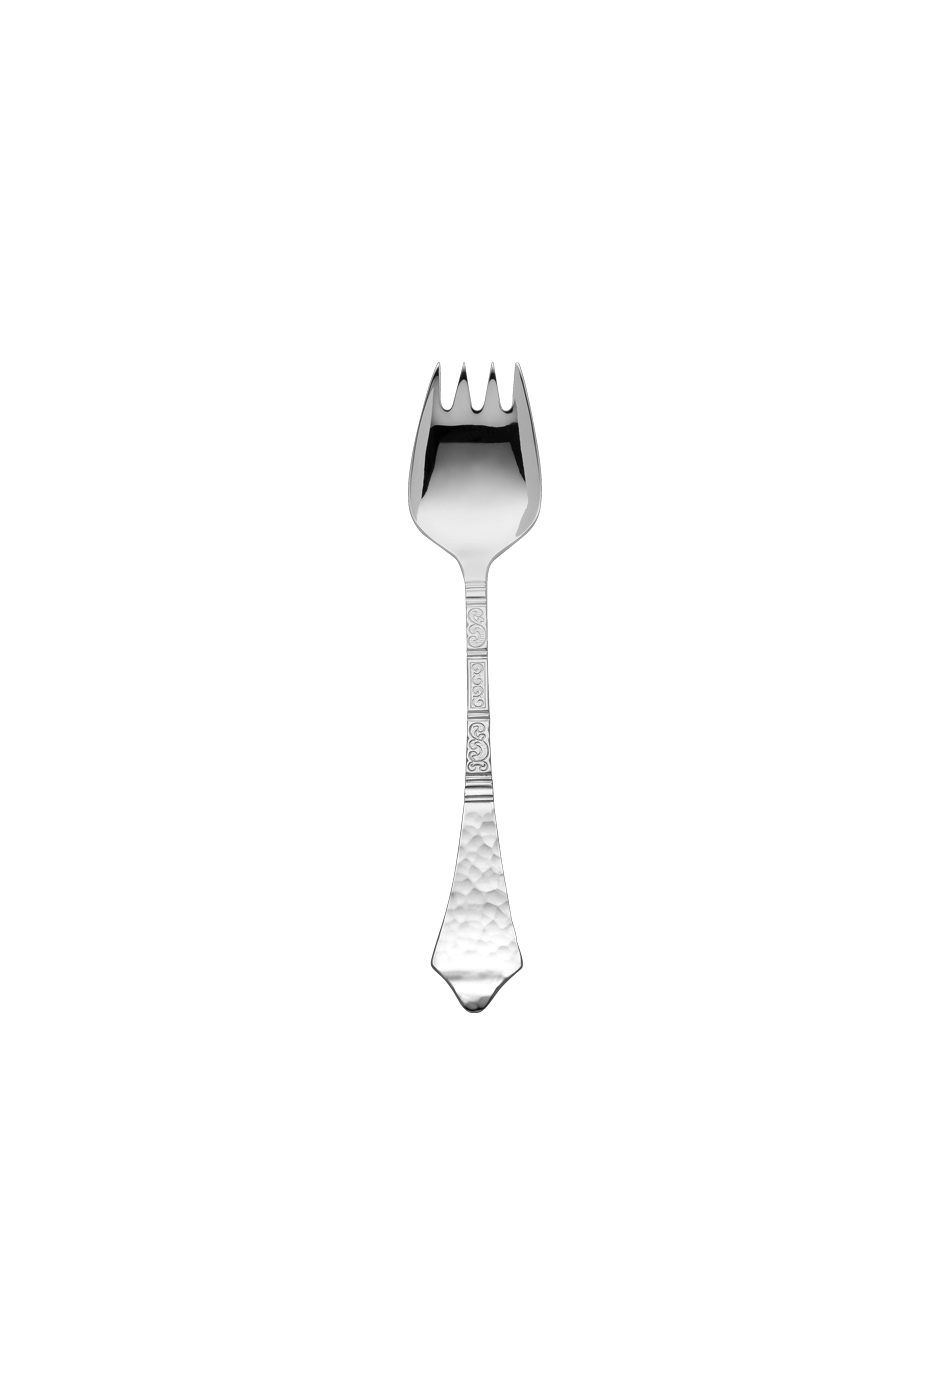 Hermitage Oyster Fork (150g massive silverplated)